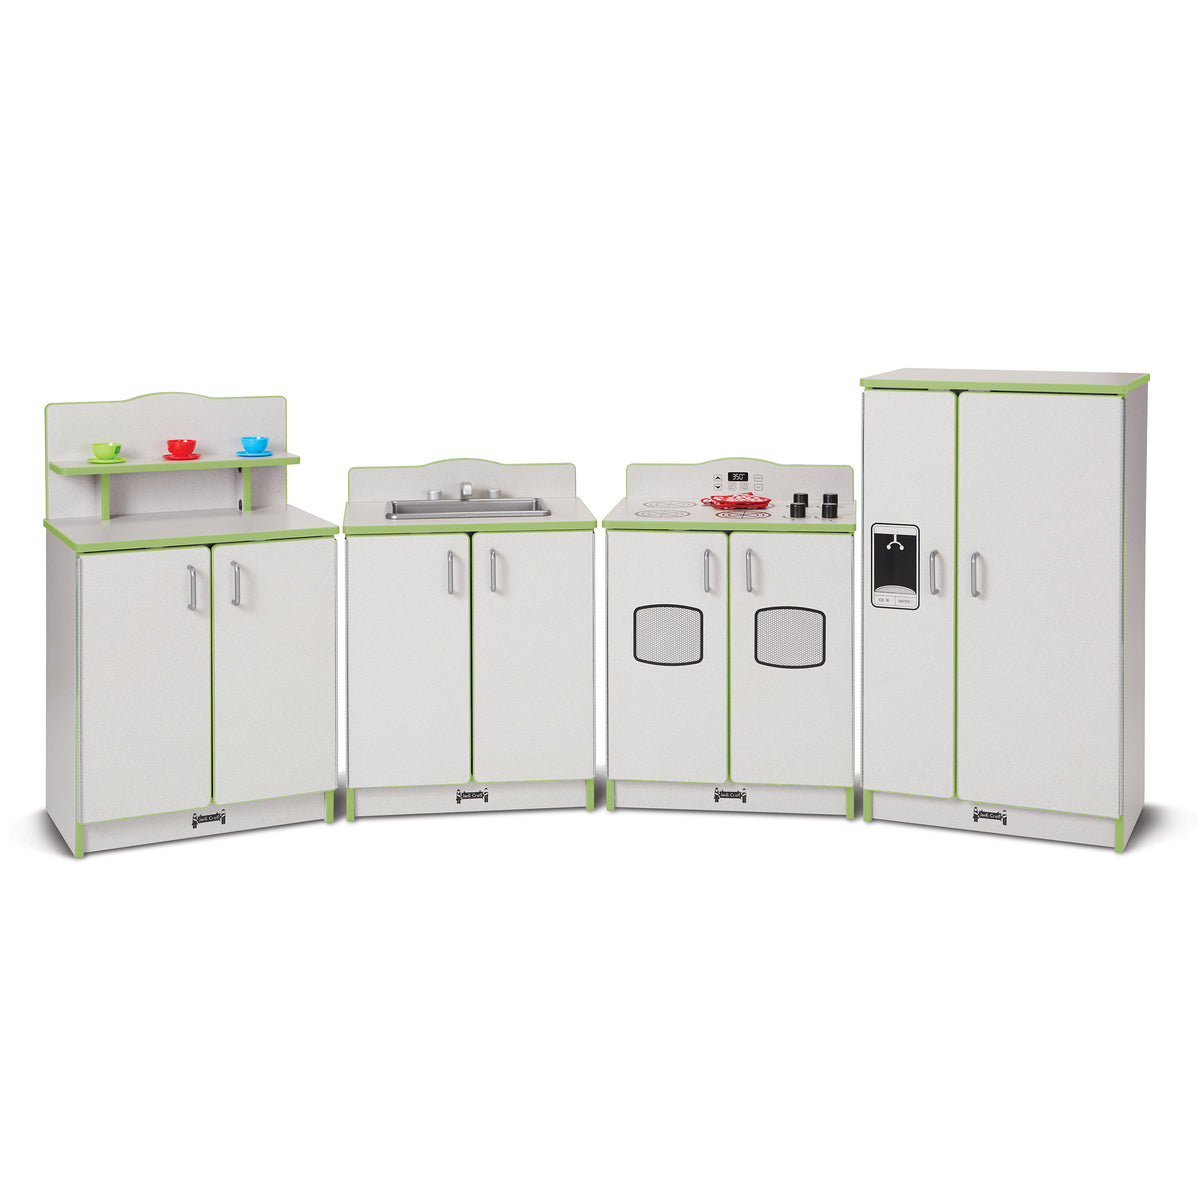 2411JCWW130, Rainbow Accents Culinary Creations Kitchen 4 Piece Set - Key Lime Green